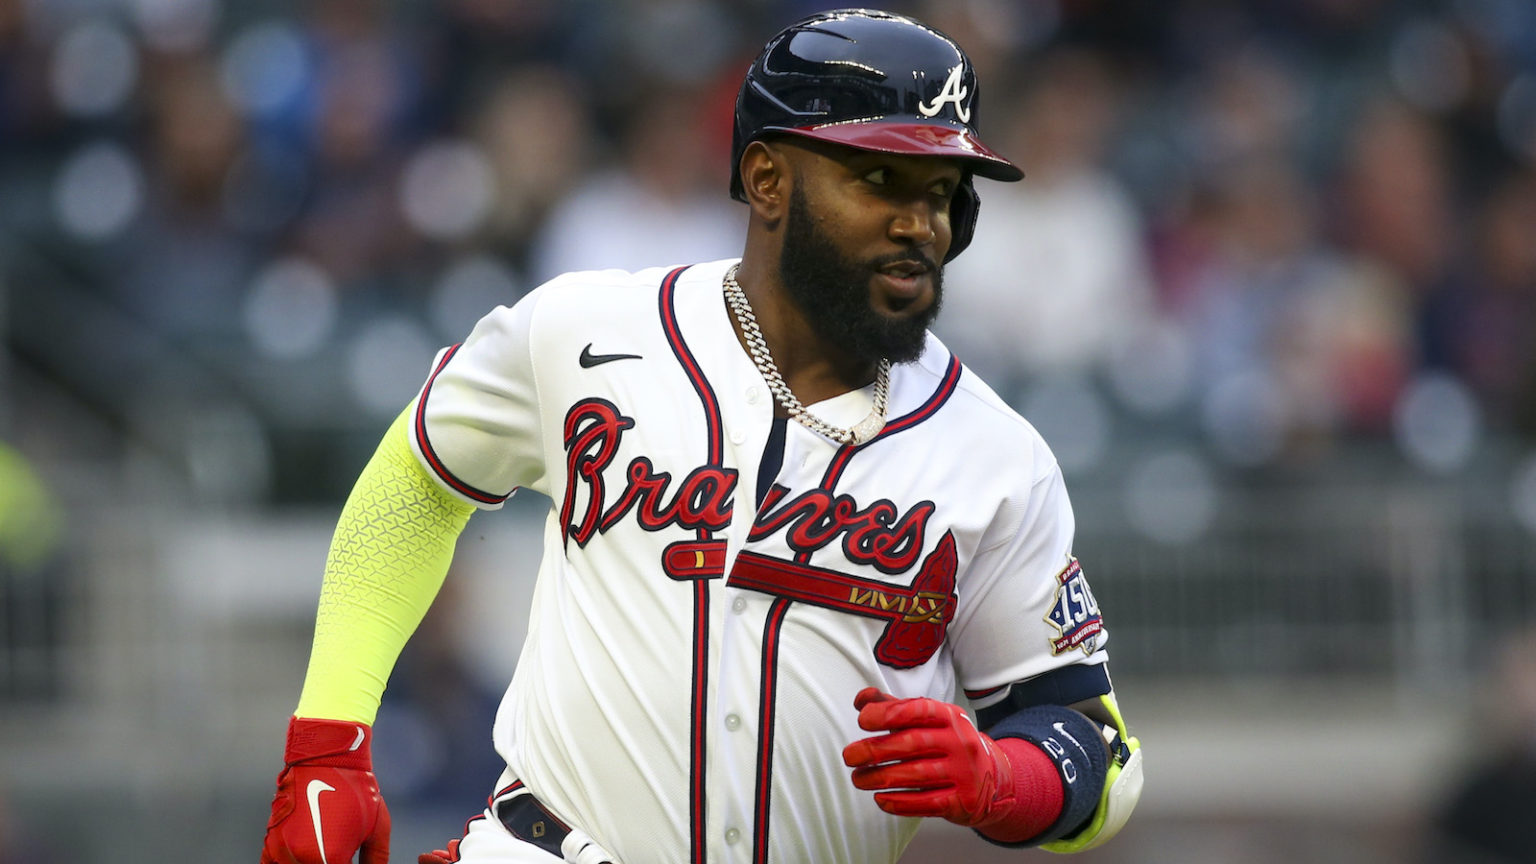 Marcell Ozuna gets brutal introduction from Braves' announcer